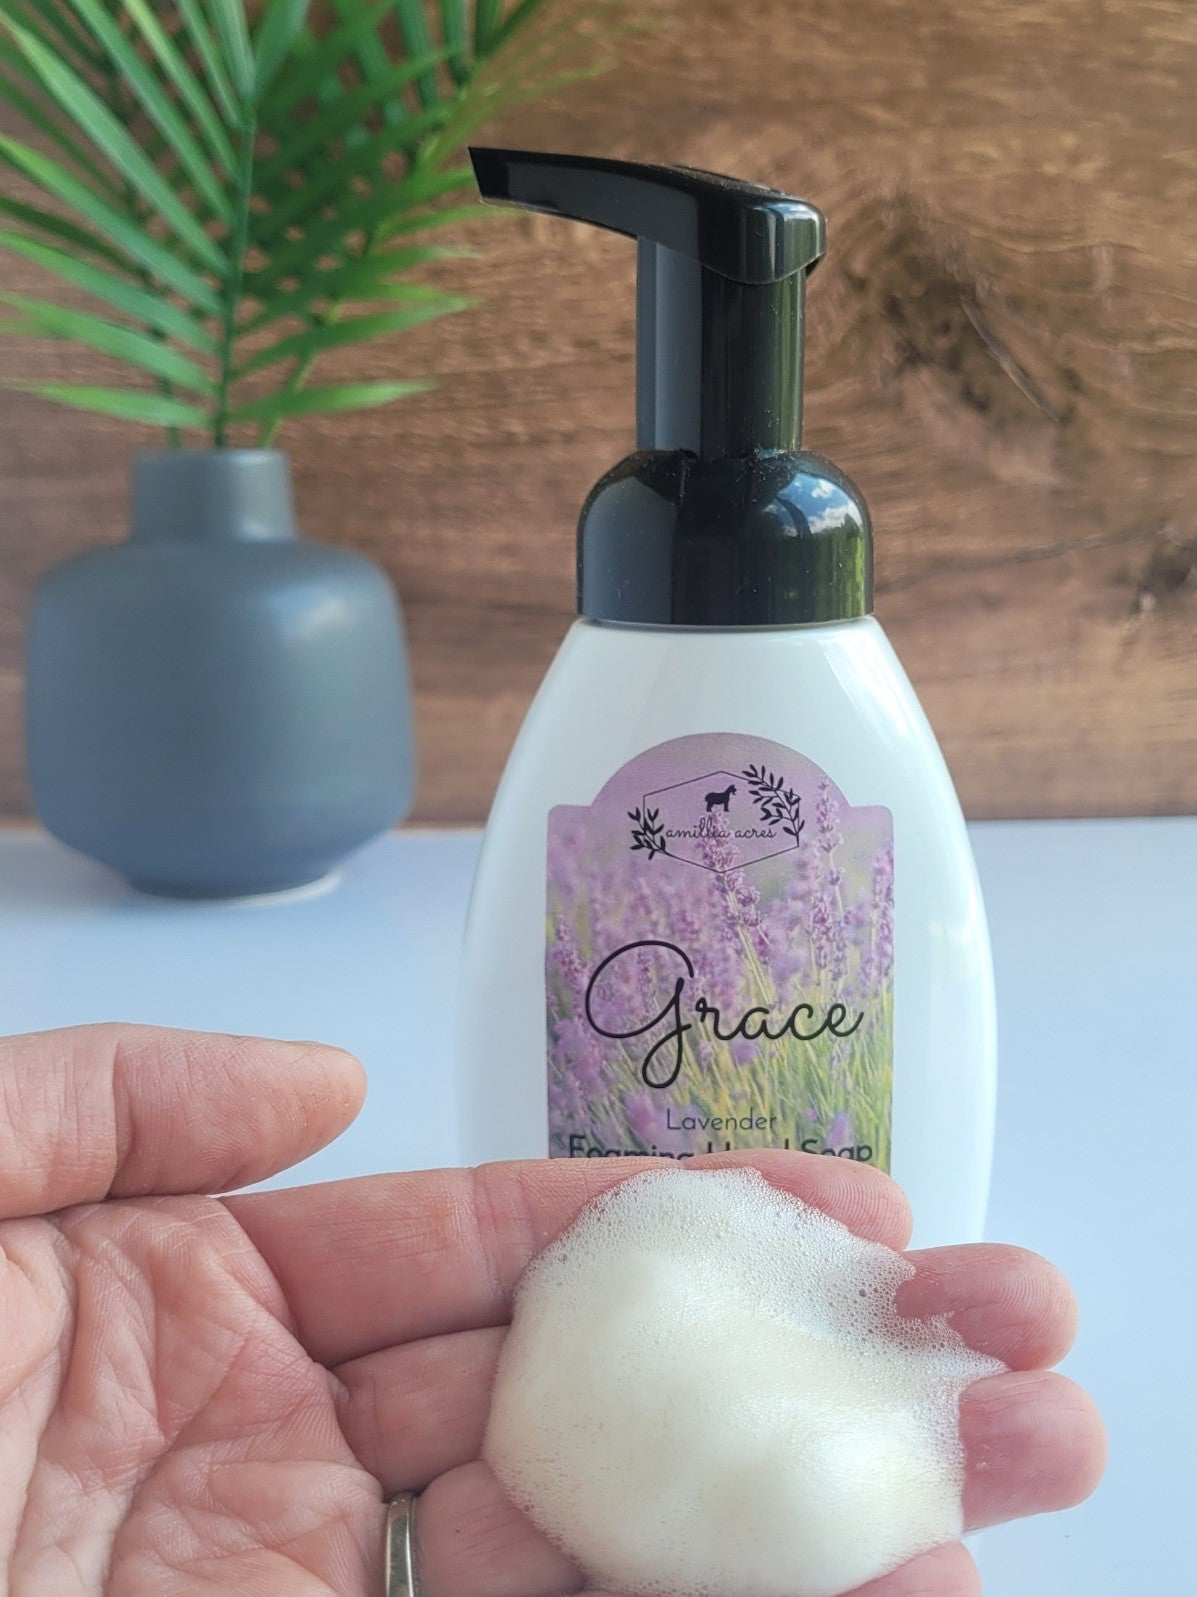 Relax Foaming Hand Soap